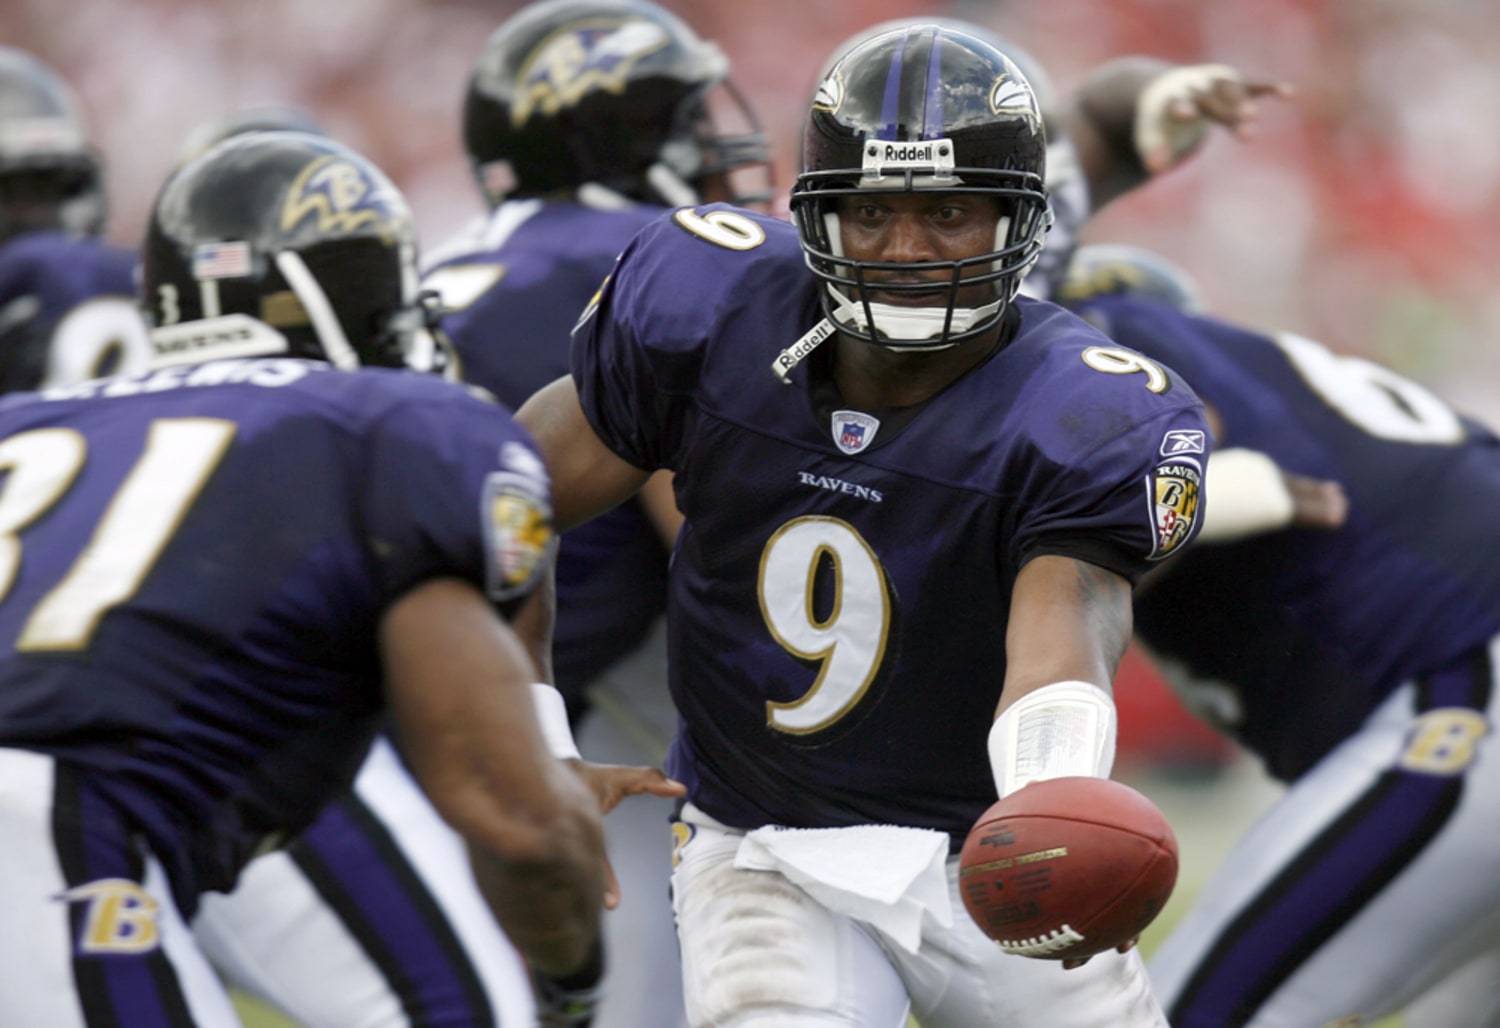 It's early, but Ravens look Super Bowl ready